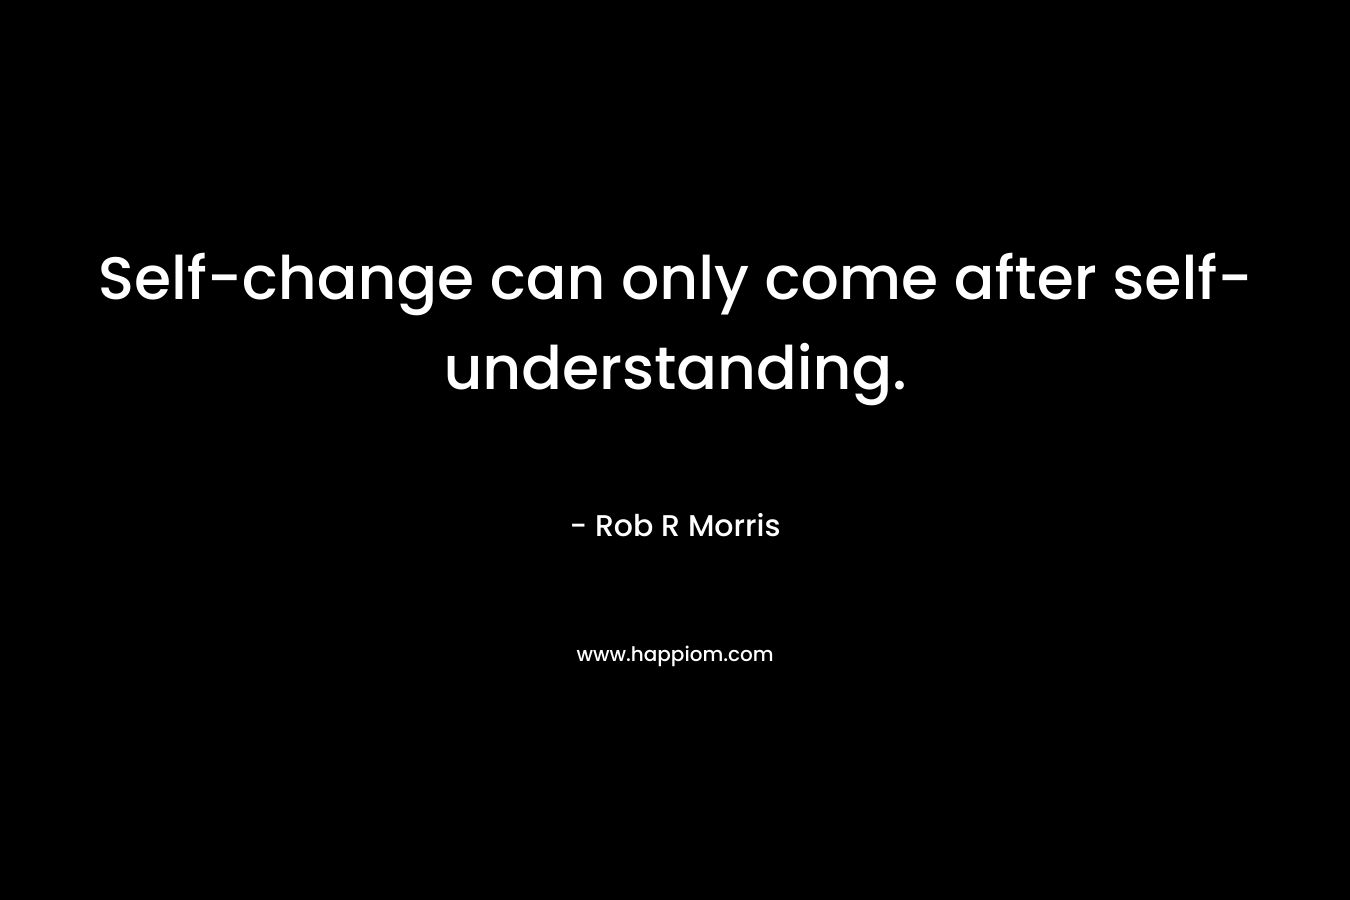 Self-change can only come after self-understanding. – Rob R Morris